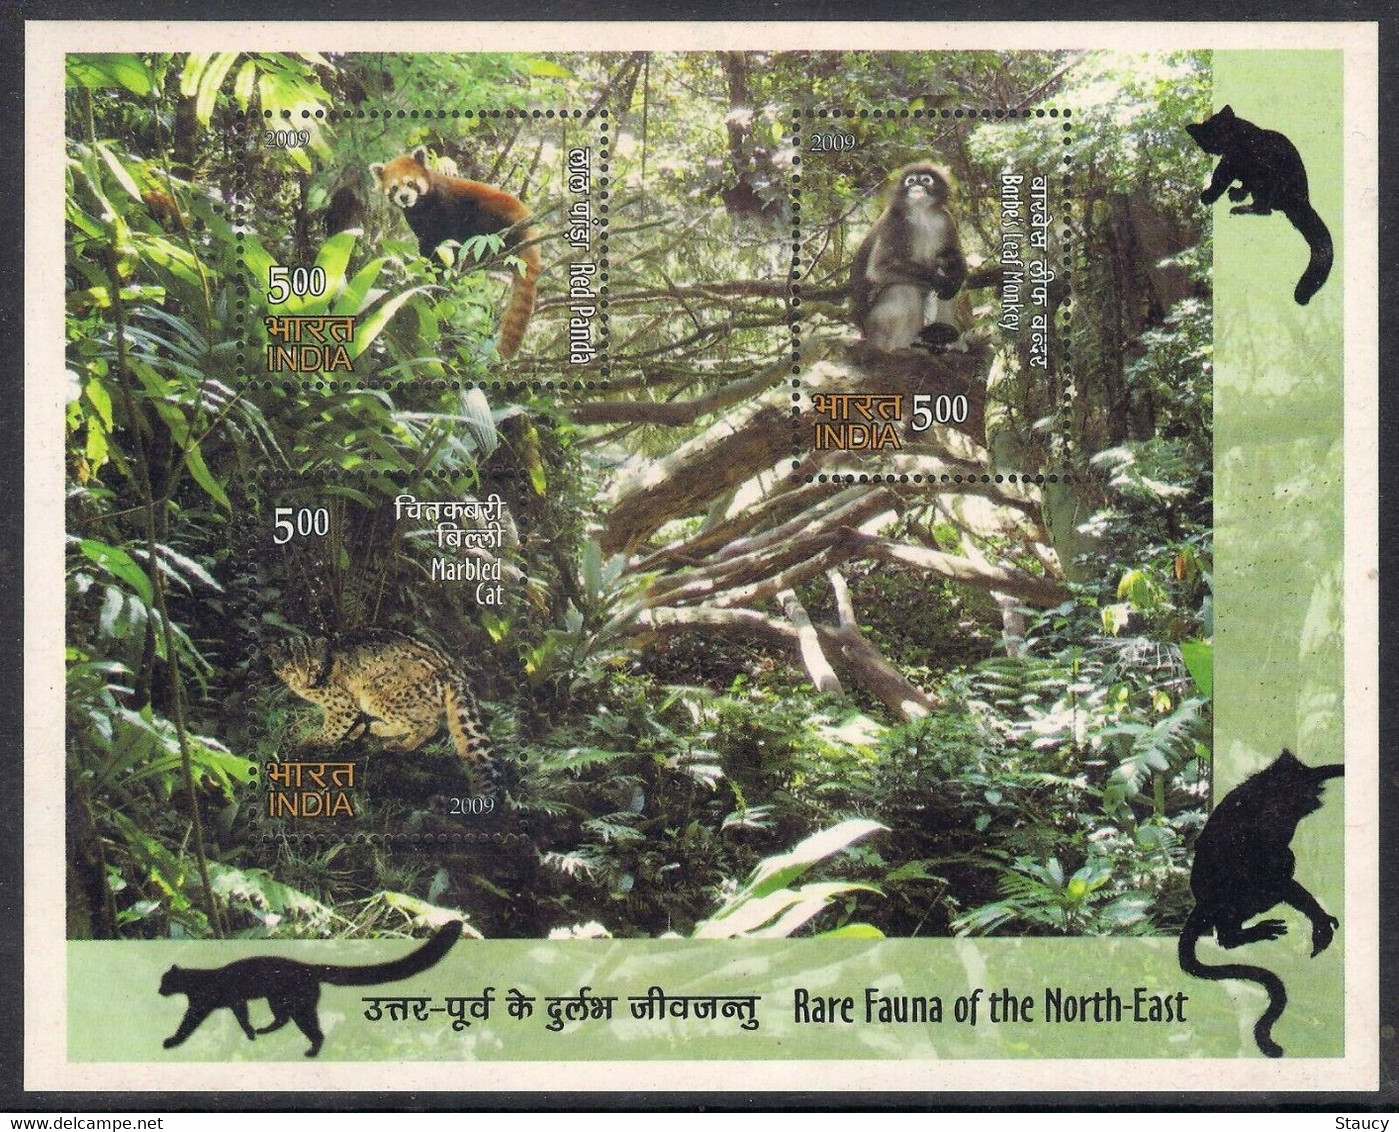 India 2009 Complete/ Full Set 12 different Mini/ Miniature sheet Year Pack Railway Fauna Art MS MNH as per scan